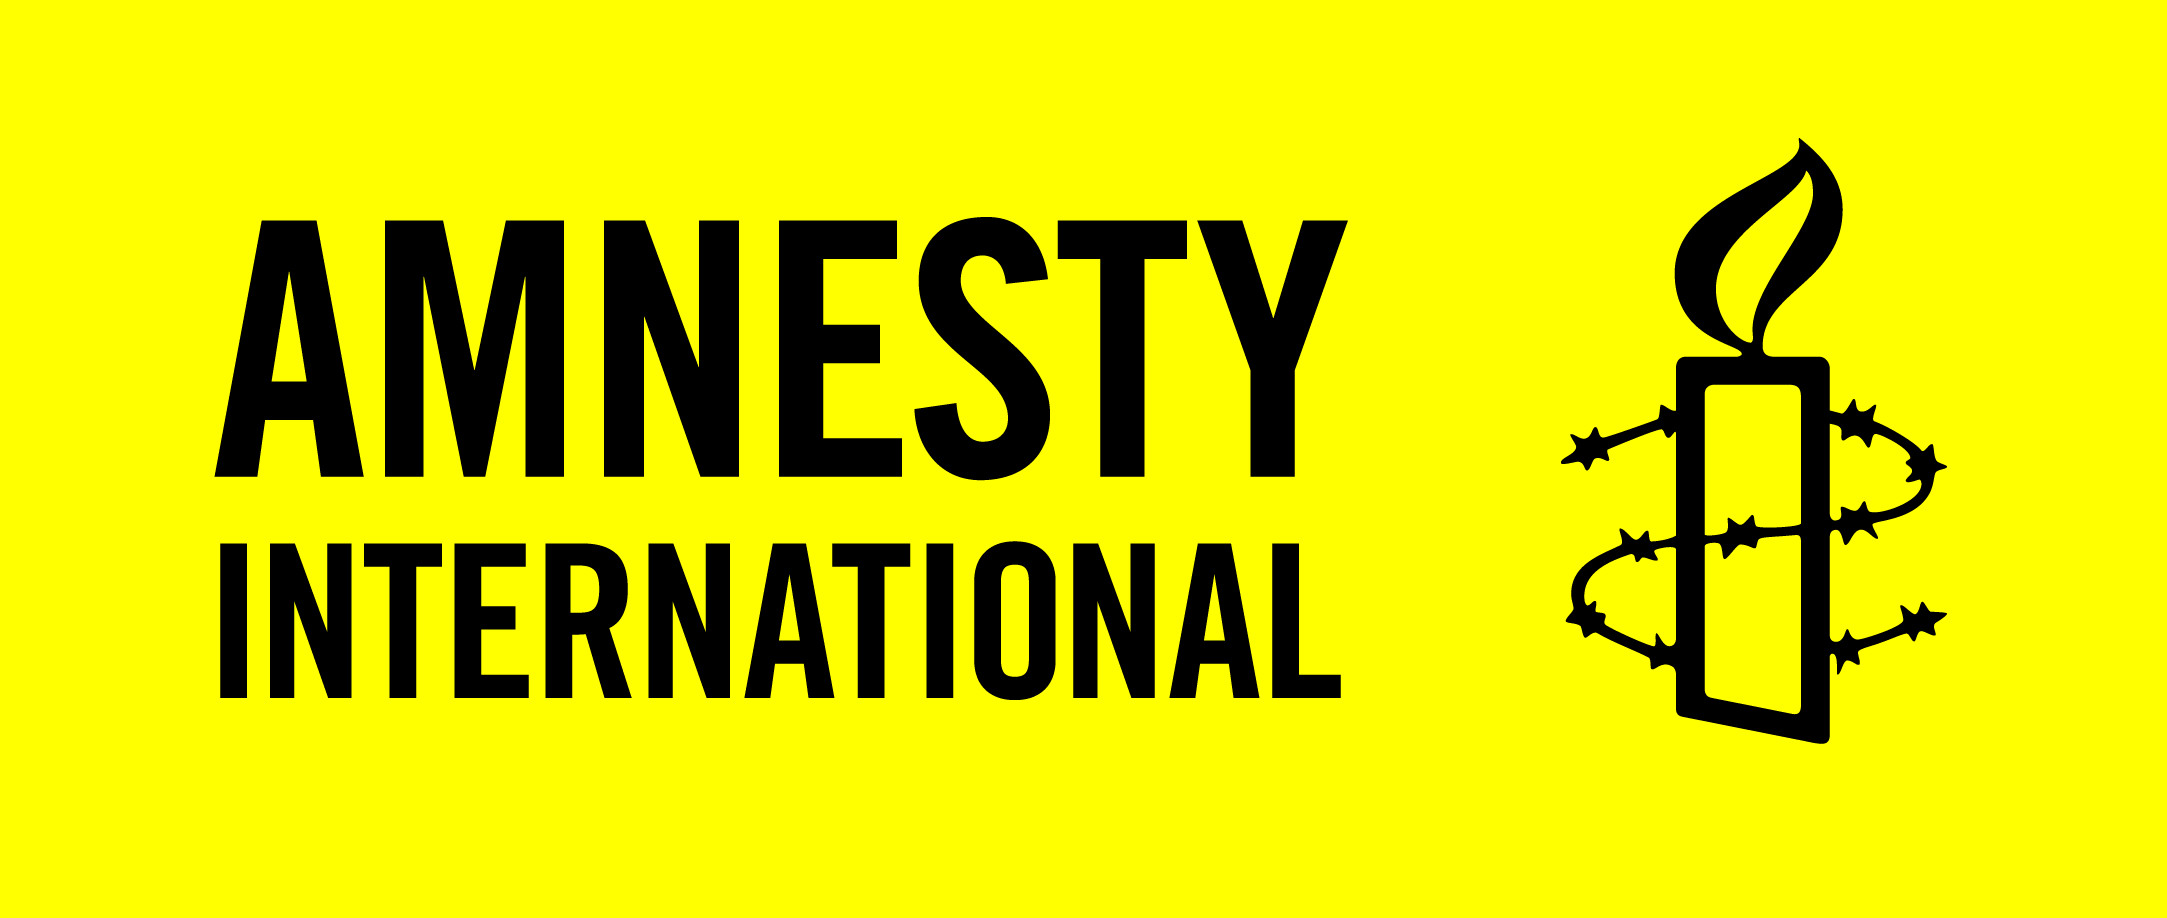 15 Facts About Amnesty International Day May 28th 